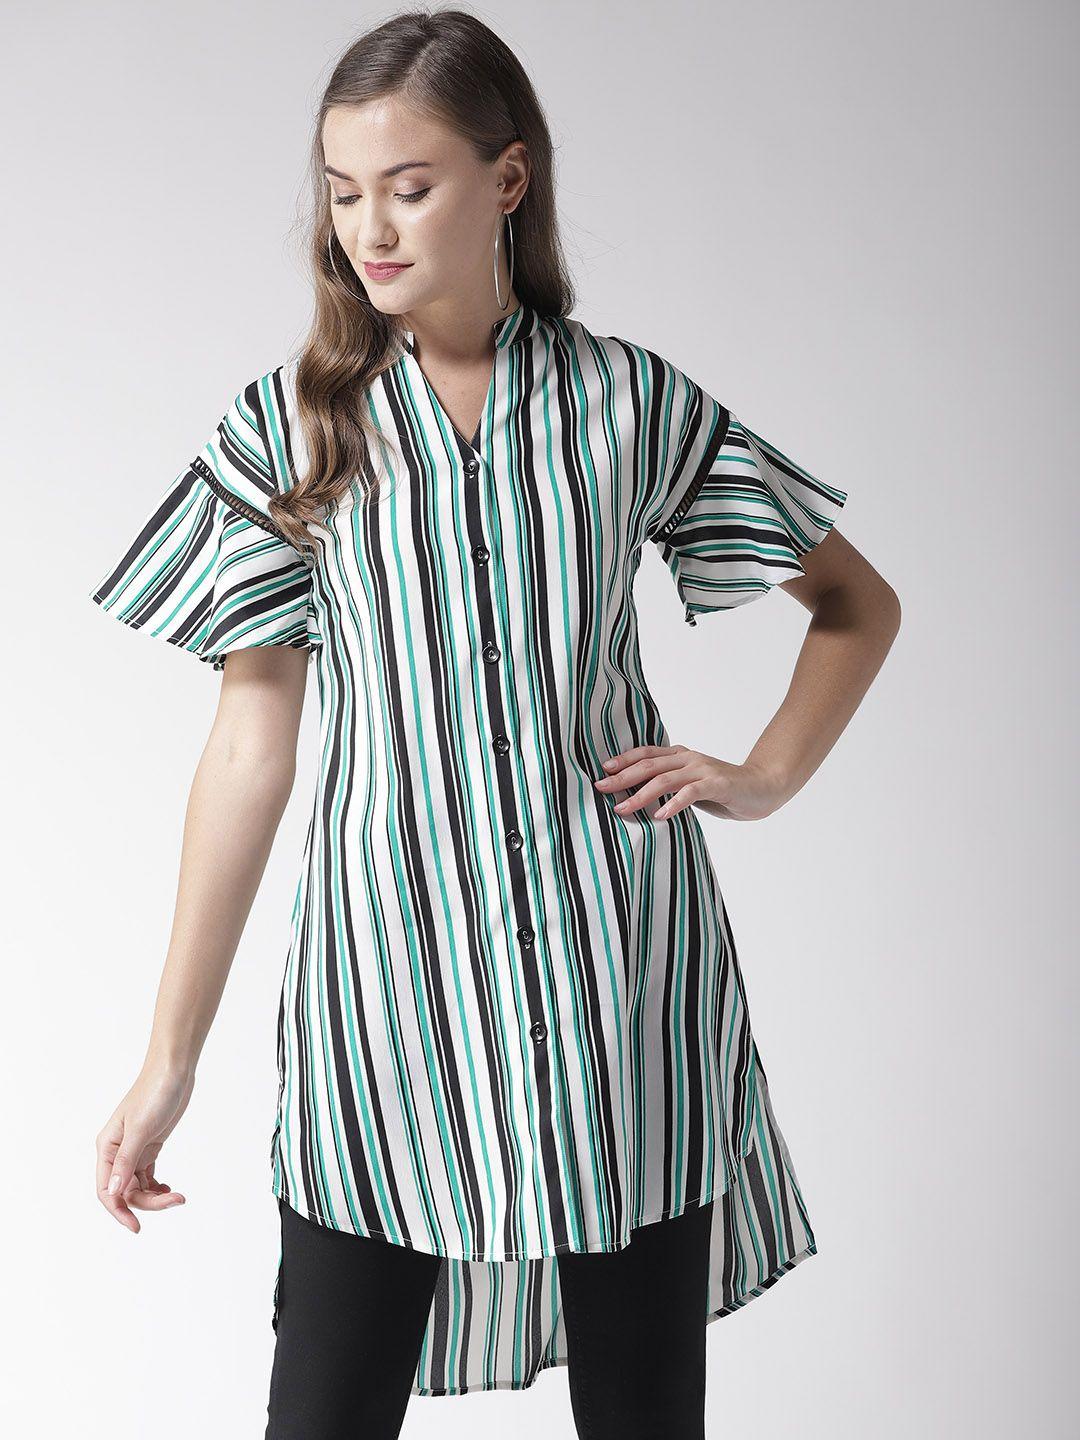 style-quotient-white-&-green-striped-tunic